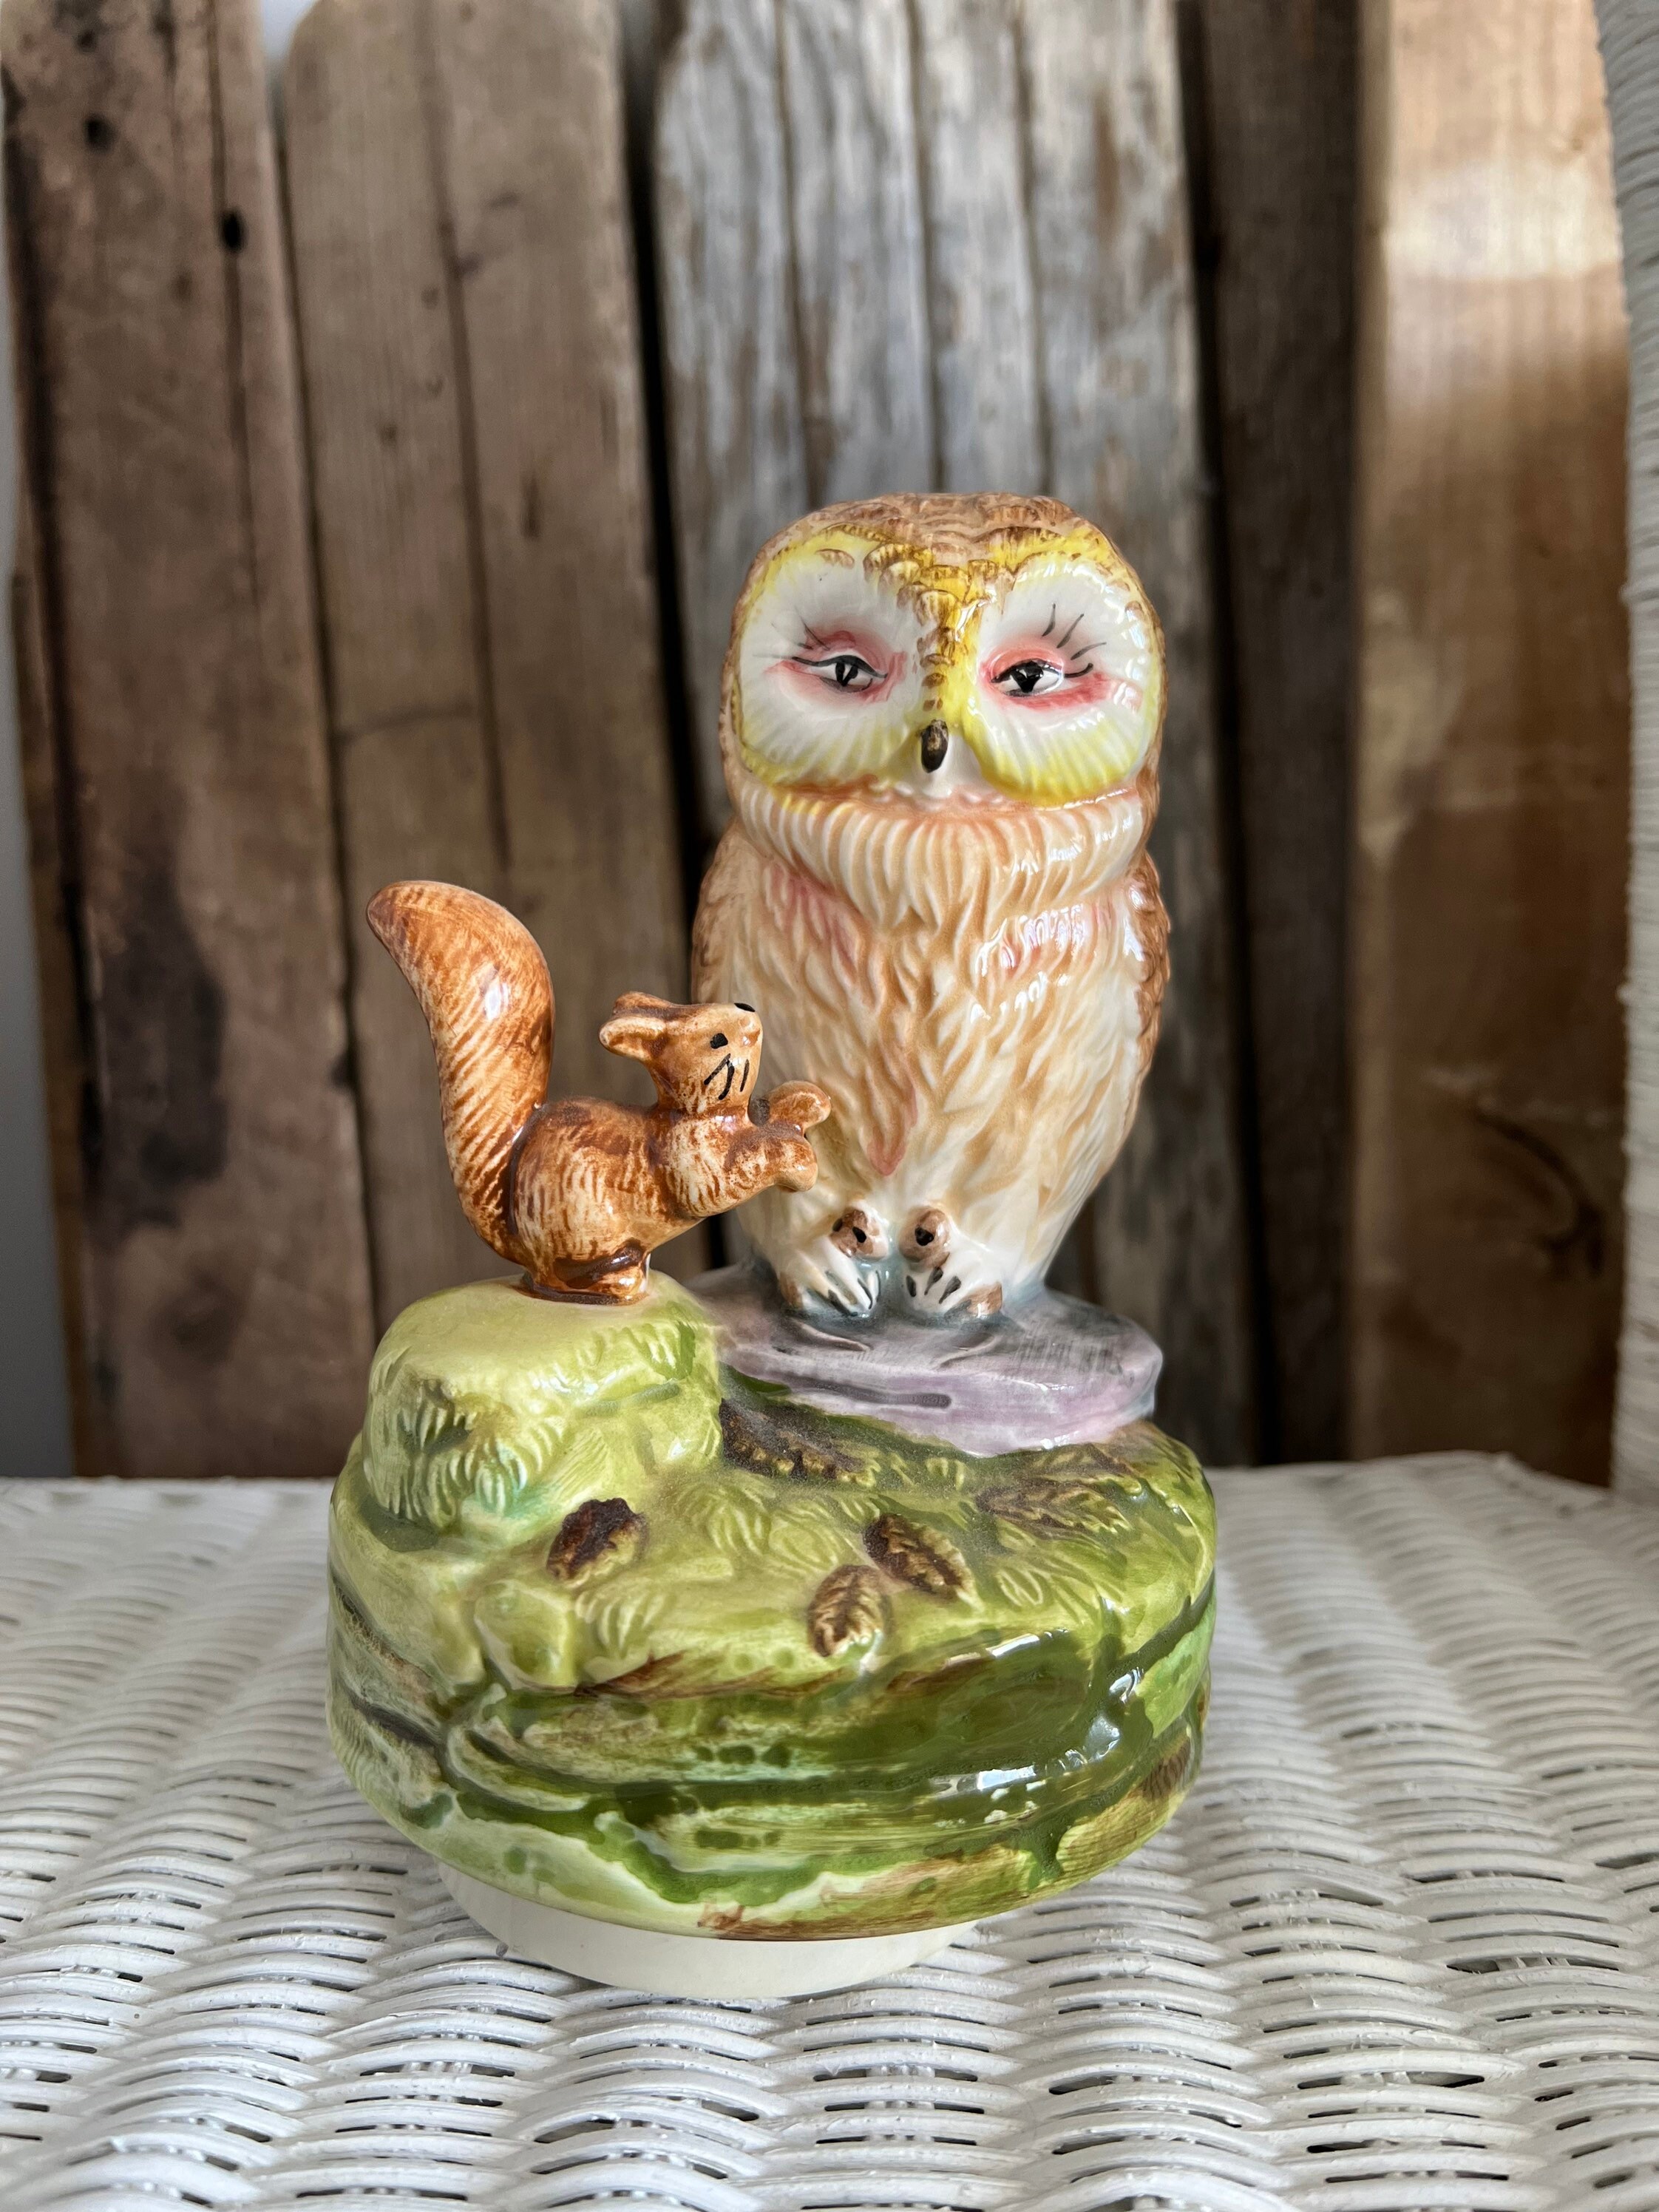 Barn Owl coin purse - Completed Projects - the Lettuce Craft Forums